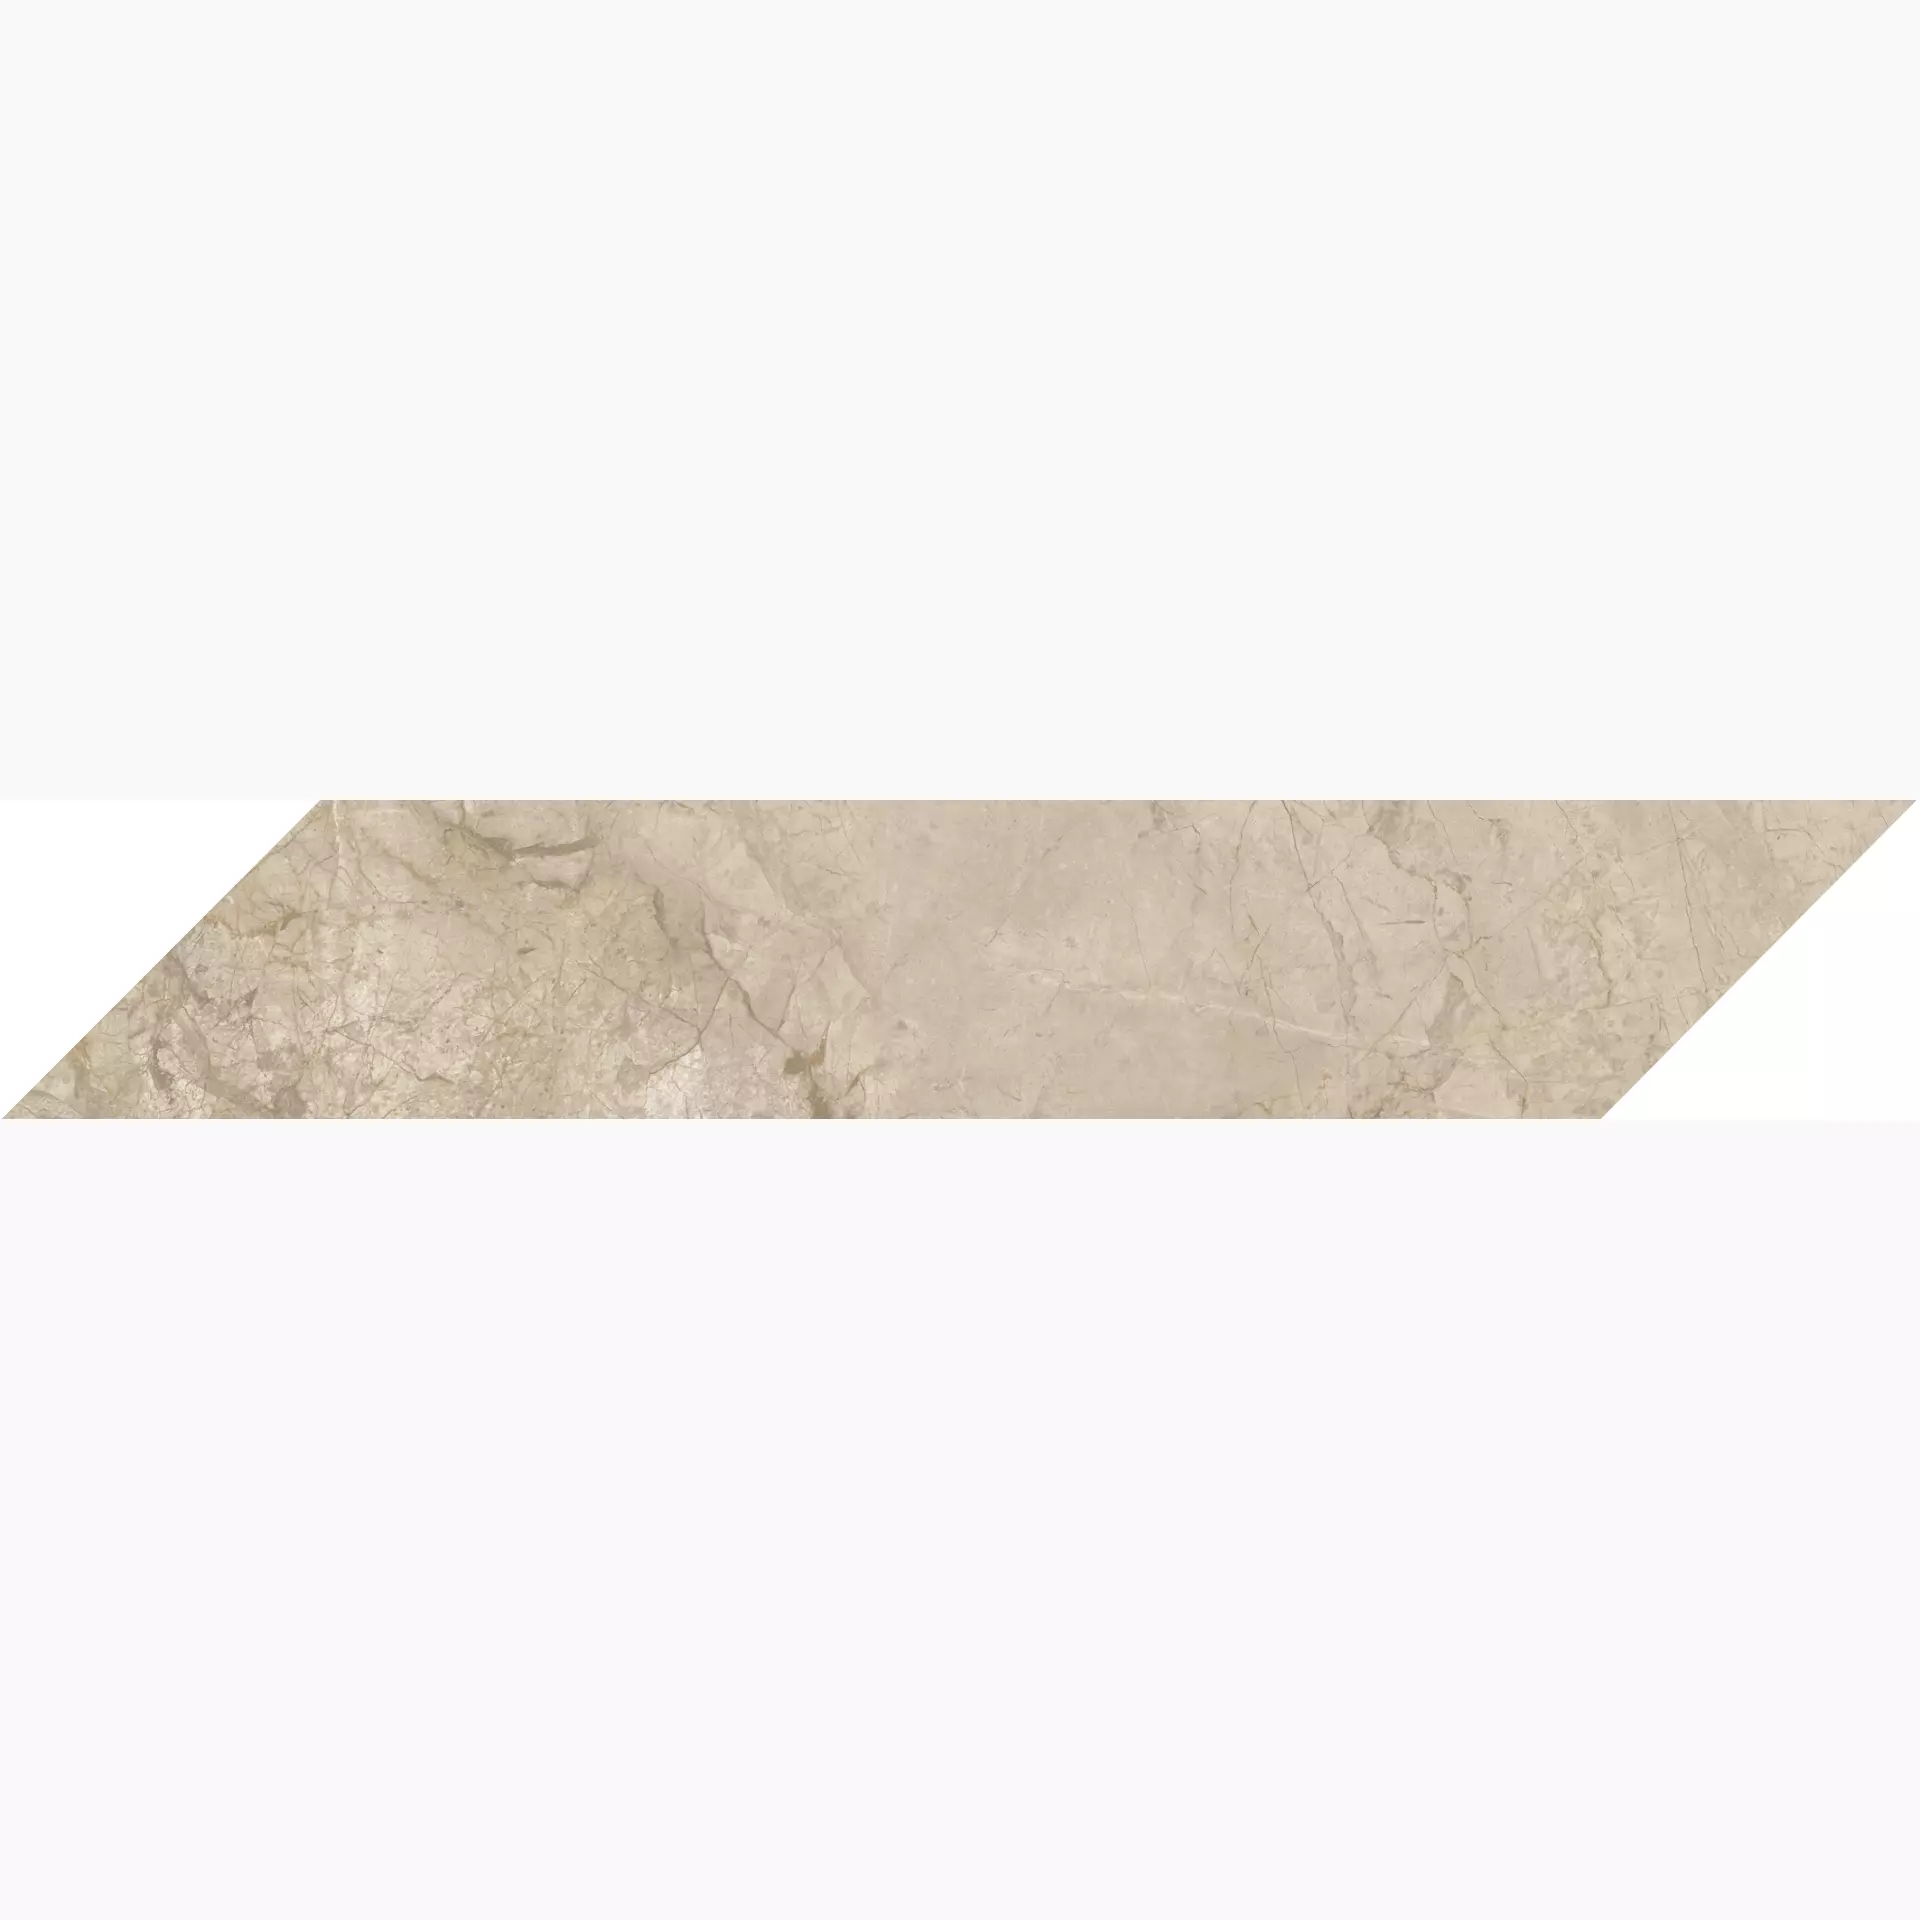 Keope Elements Lux Crema Beige Lappato Chevron Right 41325433 10x60cm rectified 9mm